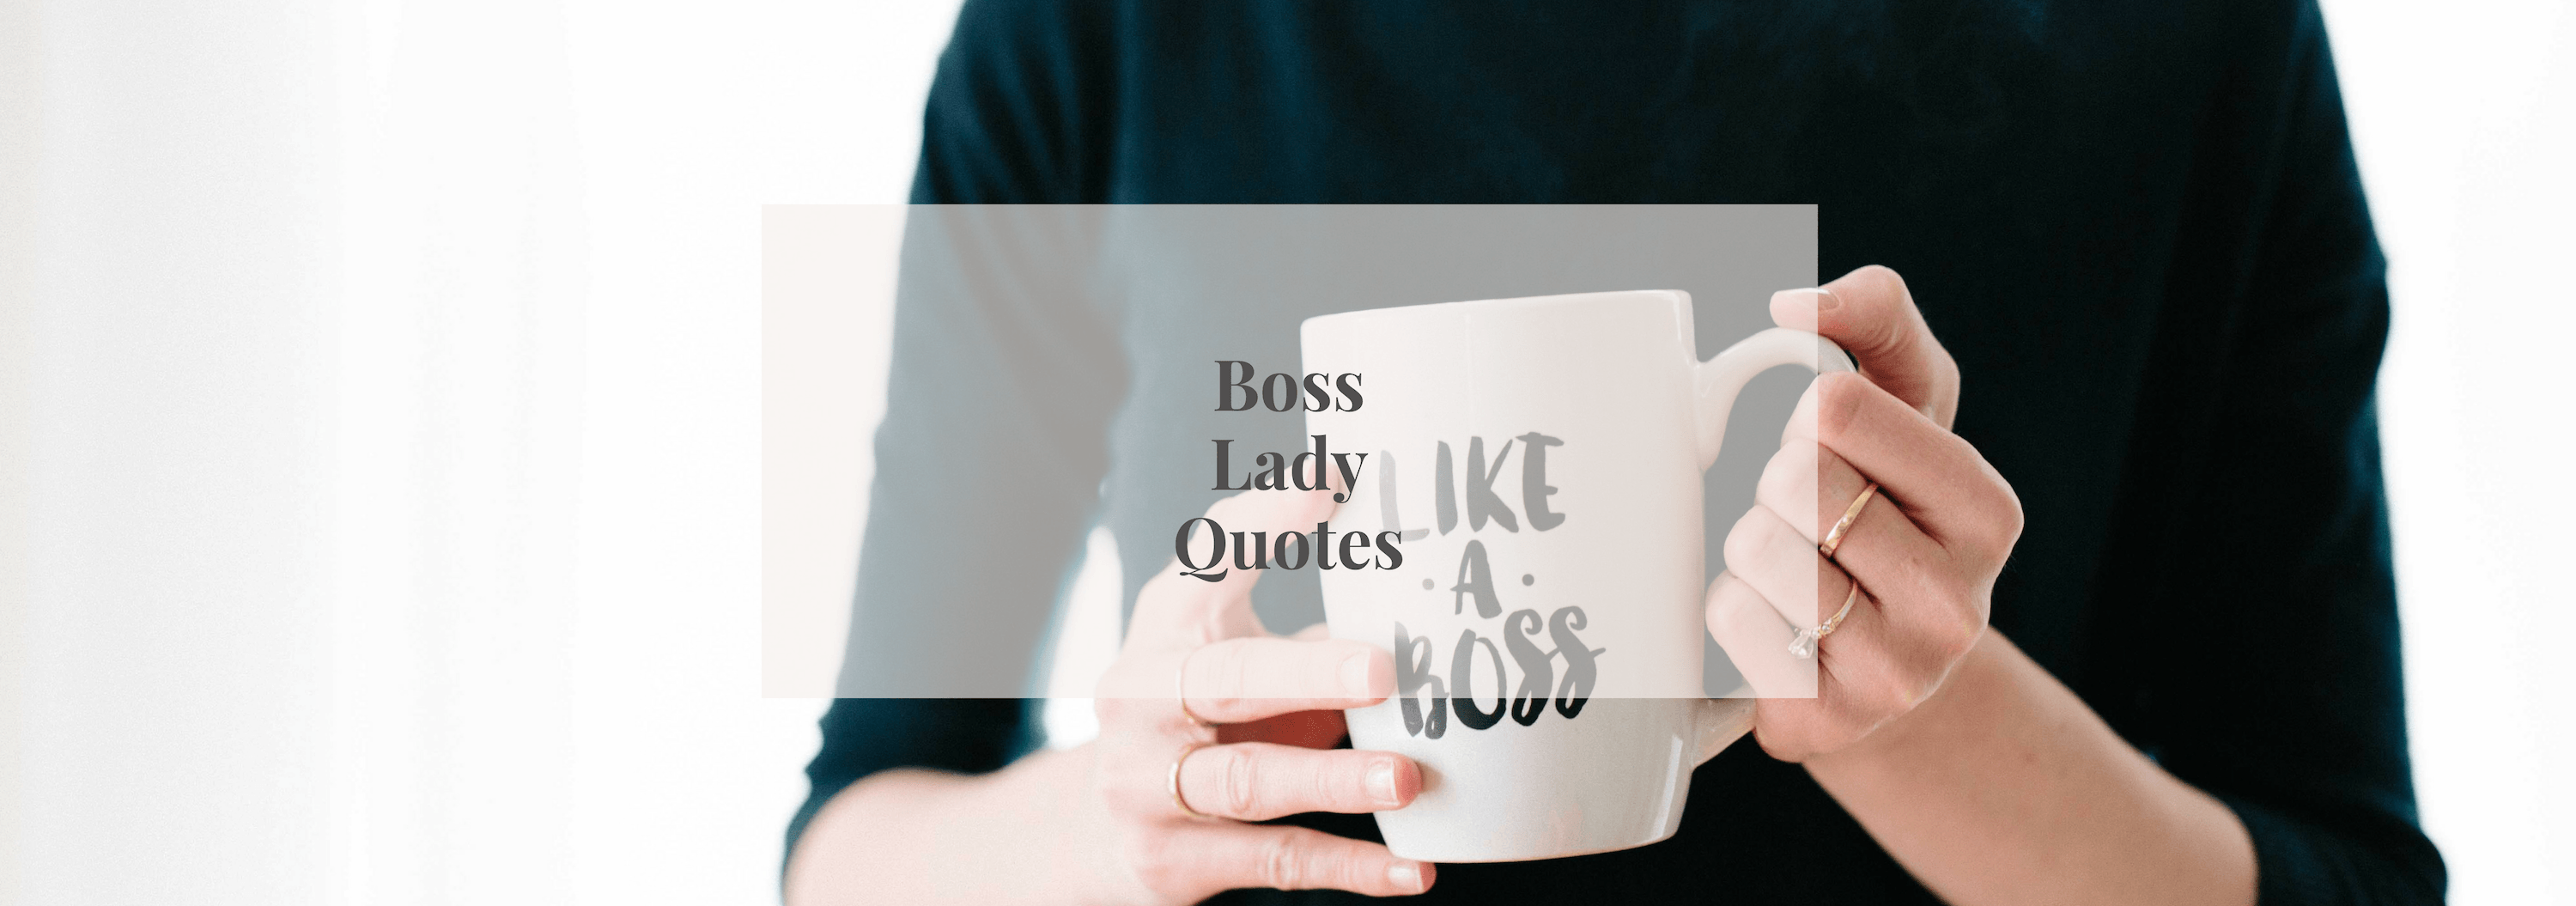 Boss Lady Quotes - Numi